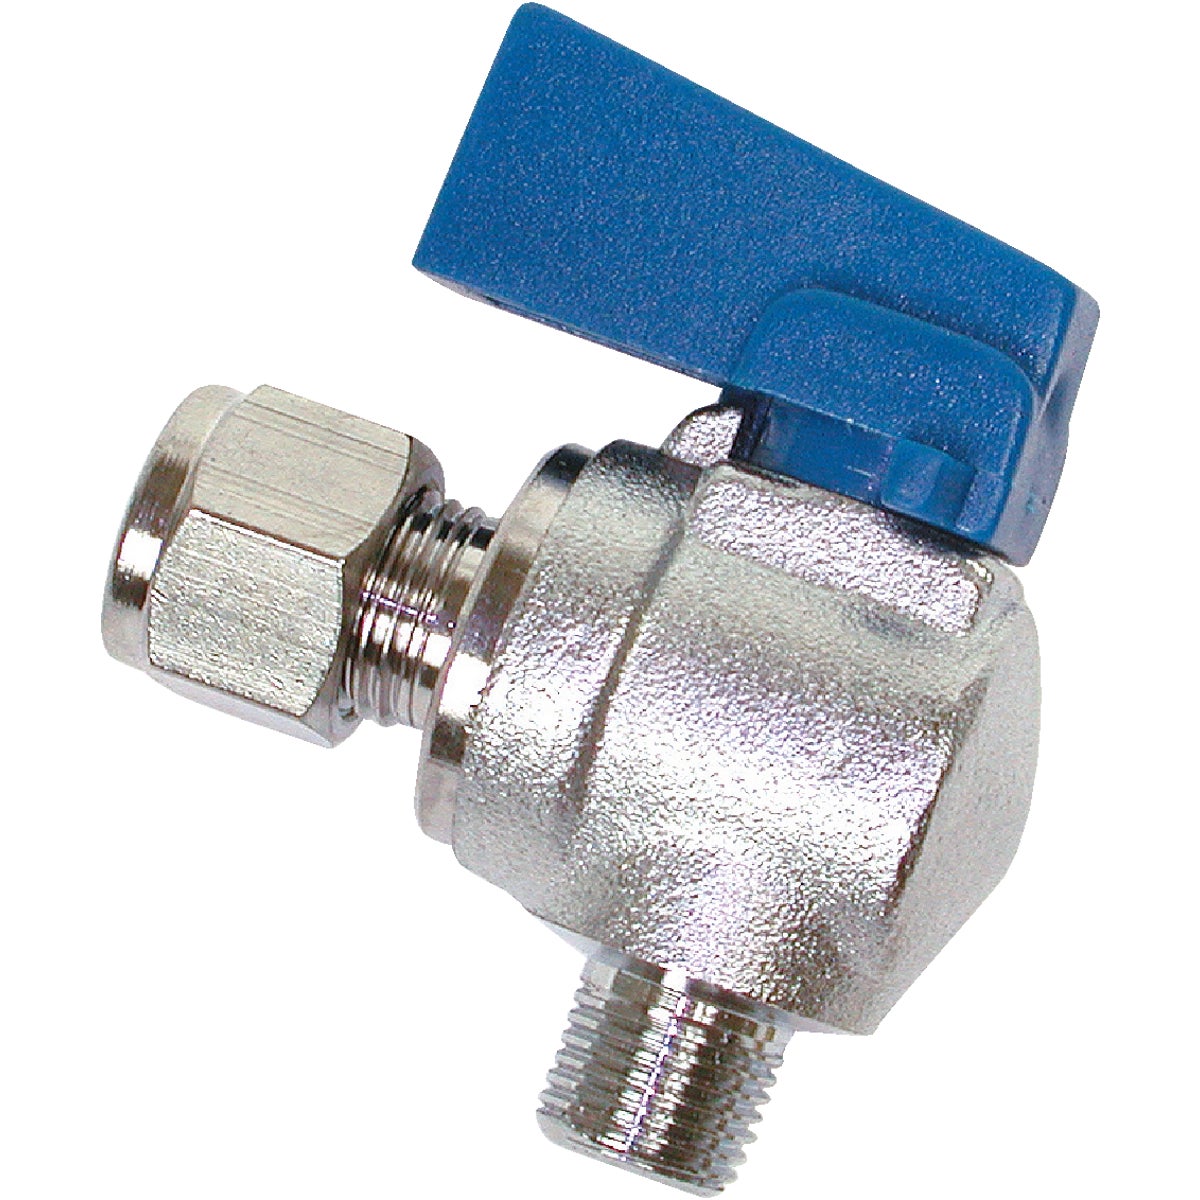 Item 486949, 1/4" compression x 1/8" MPT Stainless steel ball valve to shut off water, 